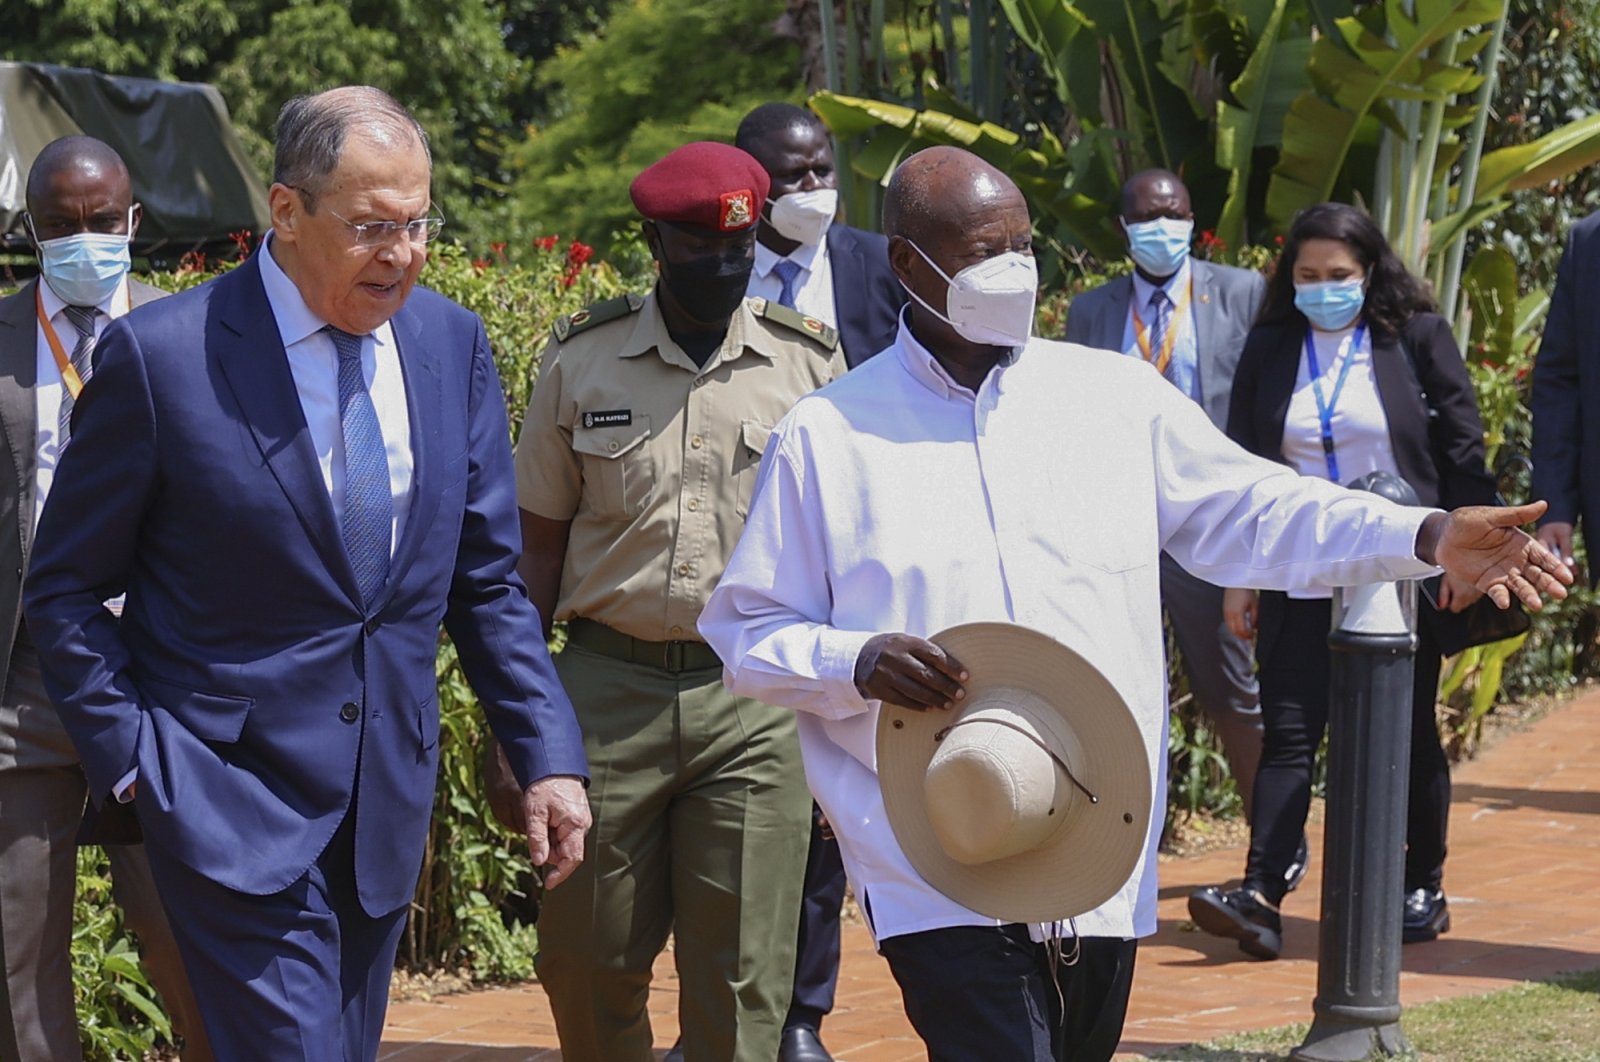 Russian Foreign Minister Sergey Lavrov (L) and Ugandan President Yowerei Museveni walk during their meeting in Entebbe, Uganda, July 26, 2022. (Russian Foreign Ministry Press Service via AP)